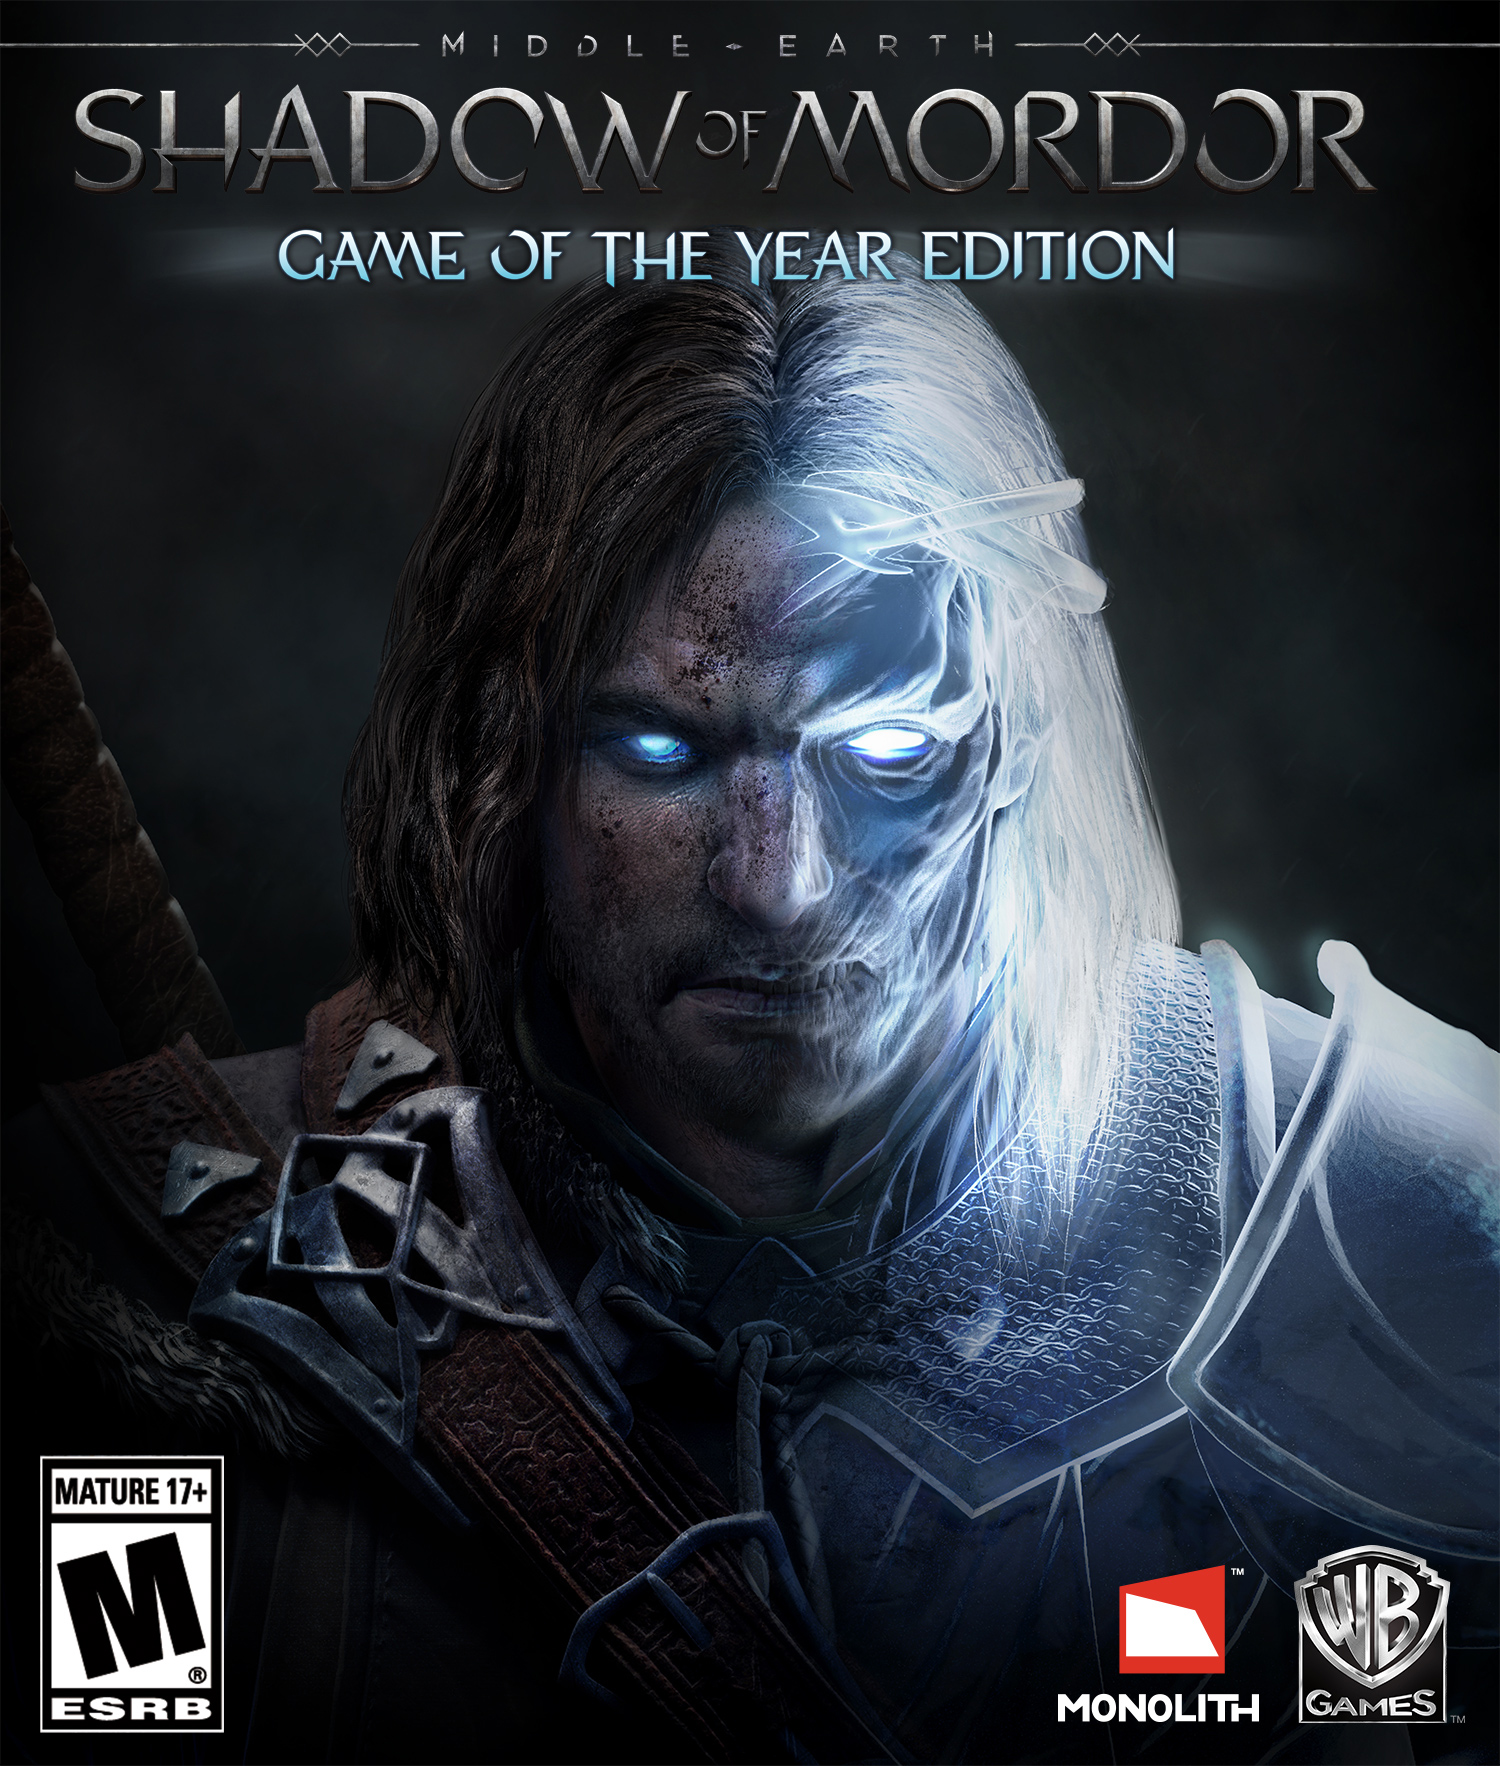 Middle-earth: Shadow of Mordor Game of the Year Edition, Lord of the Rings  Rings of Power on  Prime News, JRR Tolkien, The Hobbit and more